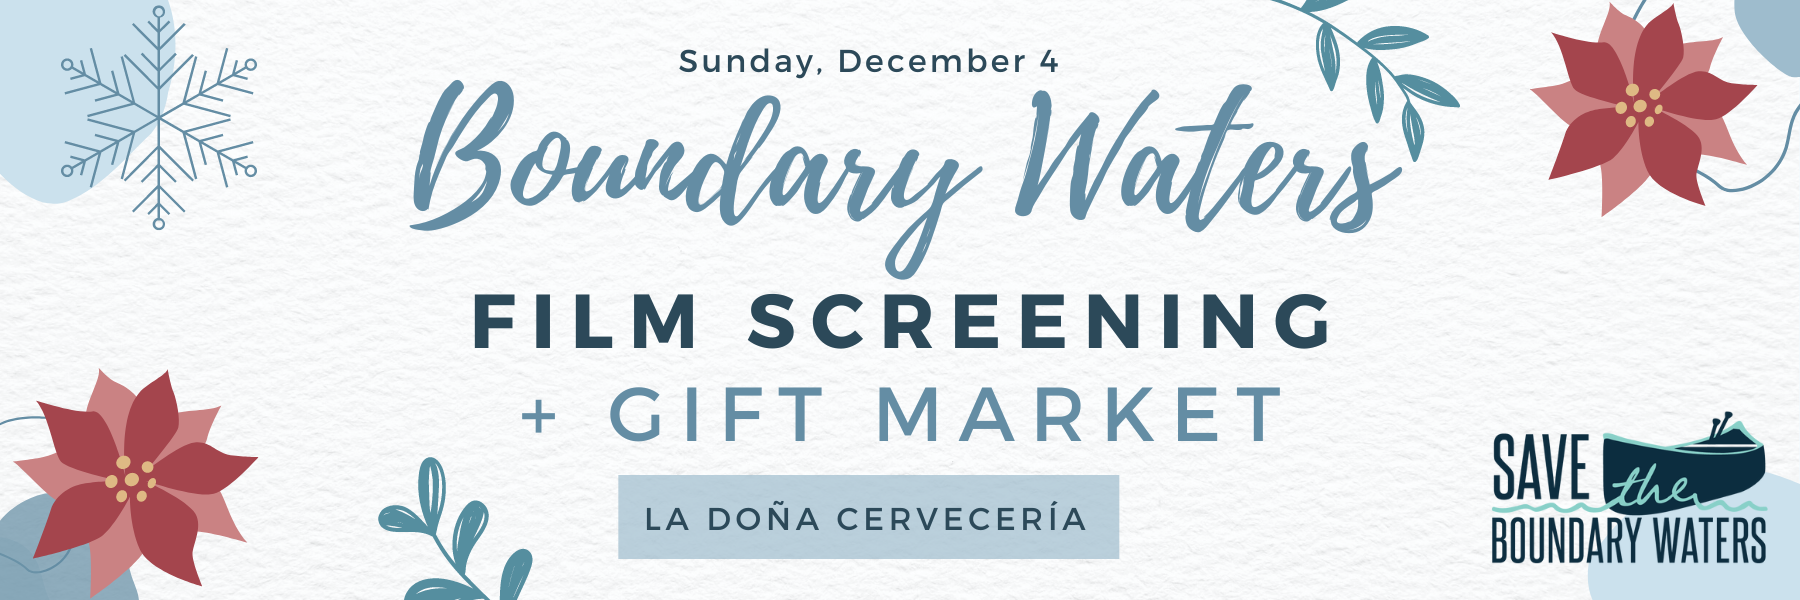 Boundary Waters film screening and gift market